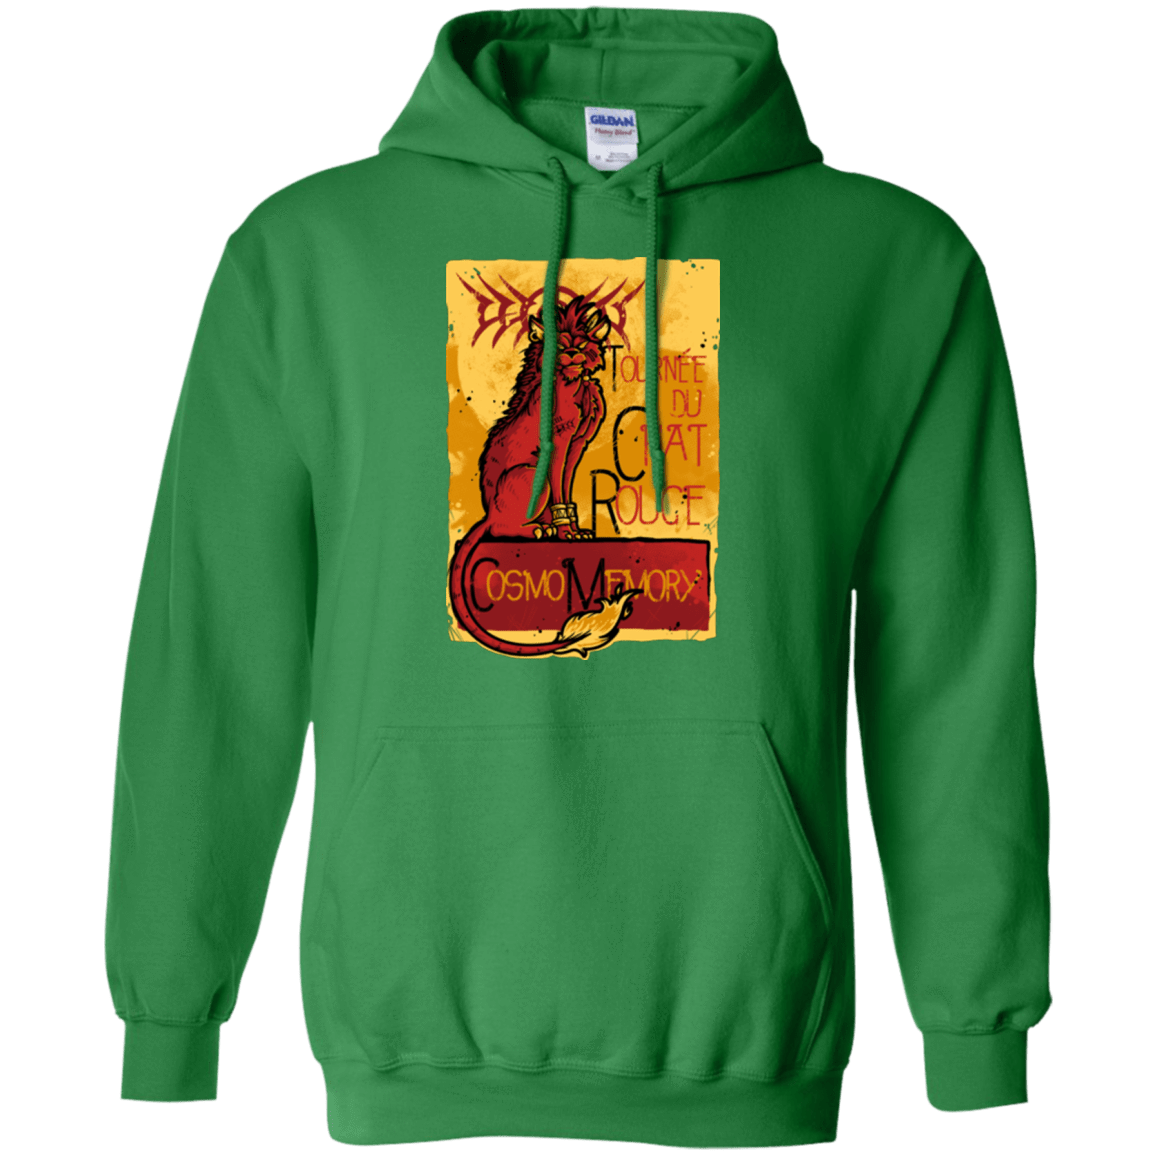 Sweatshirts Irish Green / Small LE CHAT ROUGE Pullover Hoodie